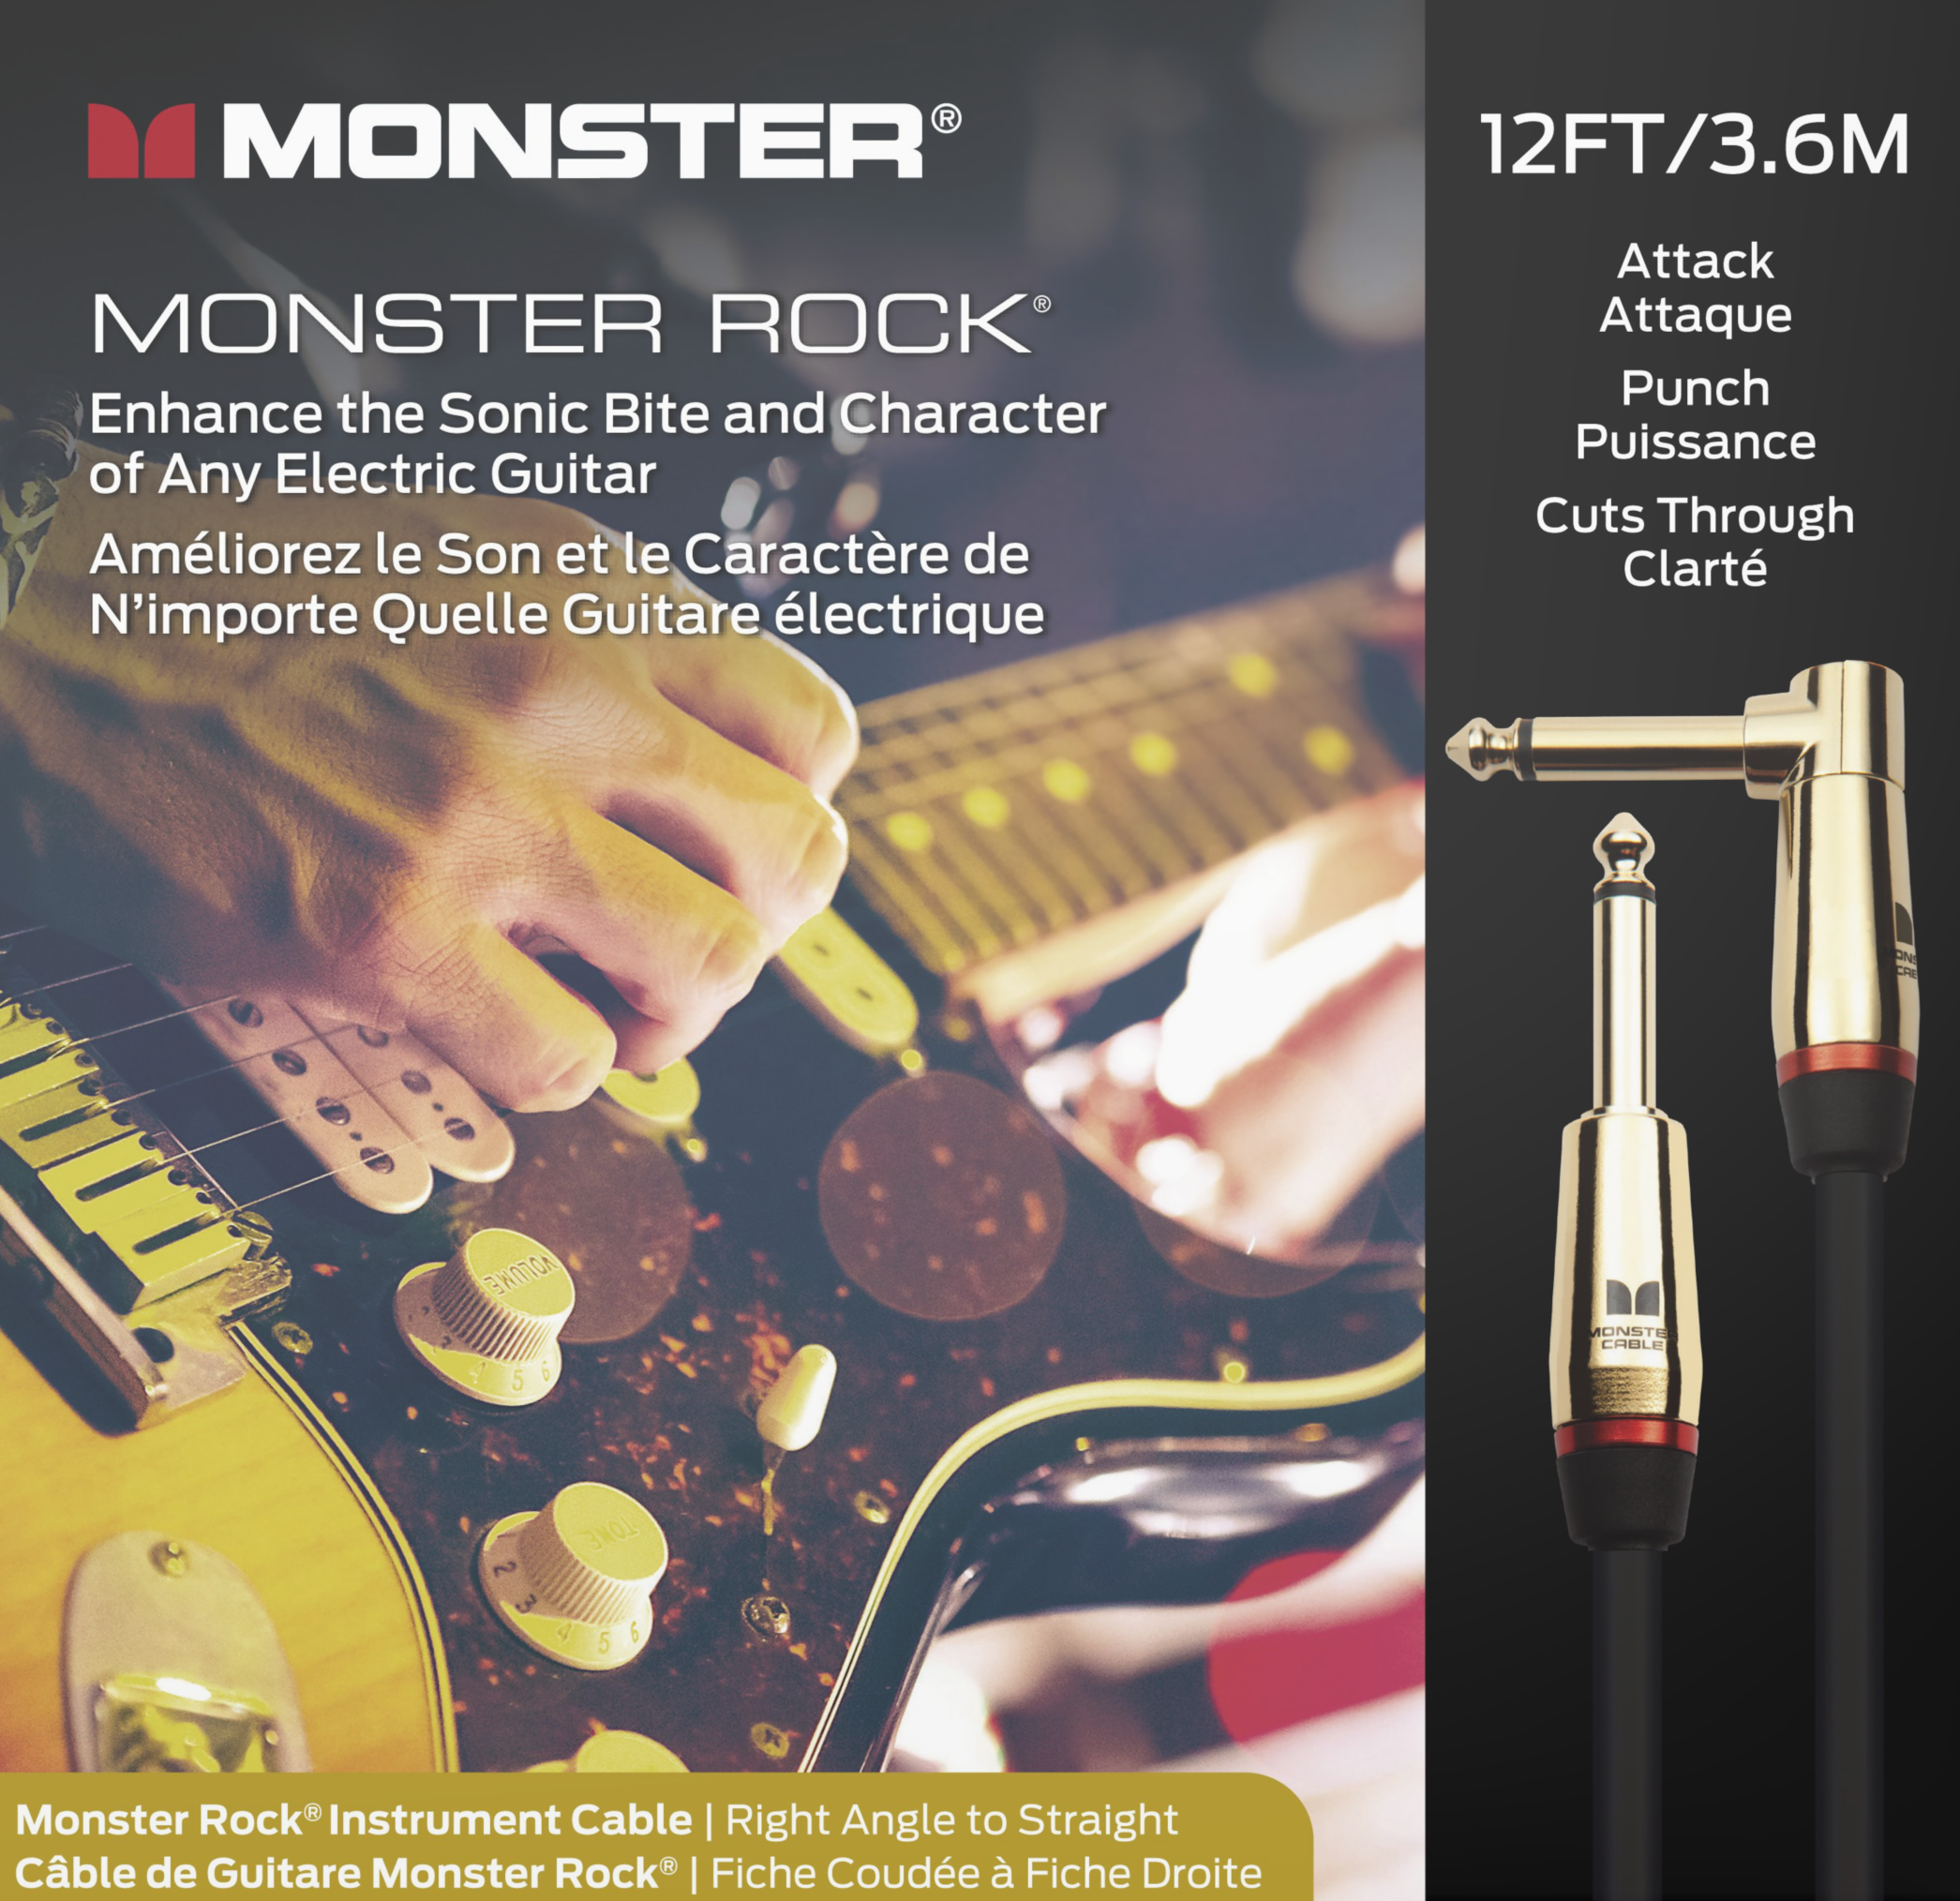 Monster® Prolink Rock Instrument Cable - HIENDGUITAR 12ft(3.6m) / Straight-Angle 12ft(3.6m) Monstercable Cable